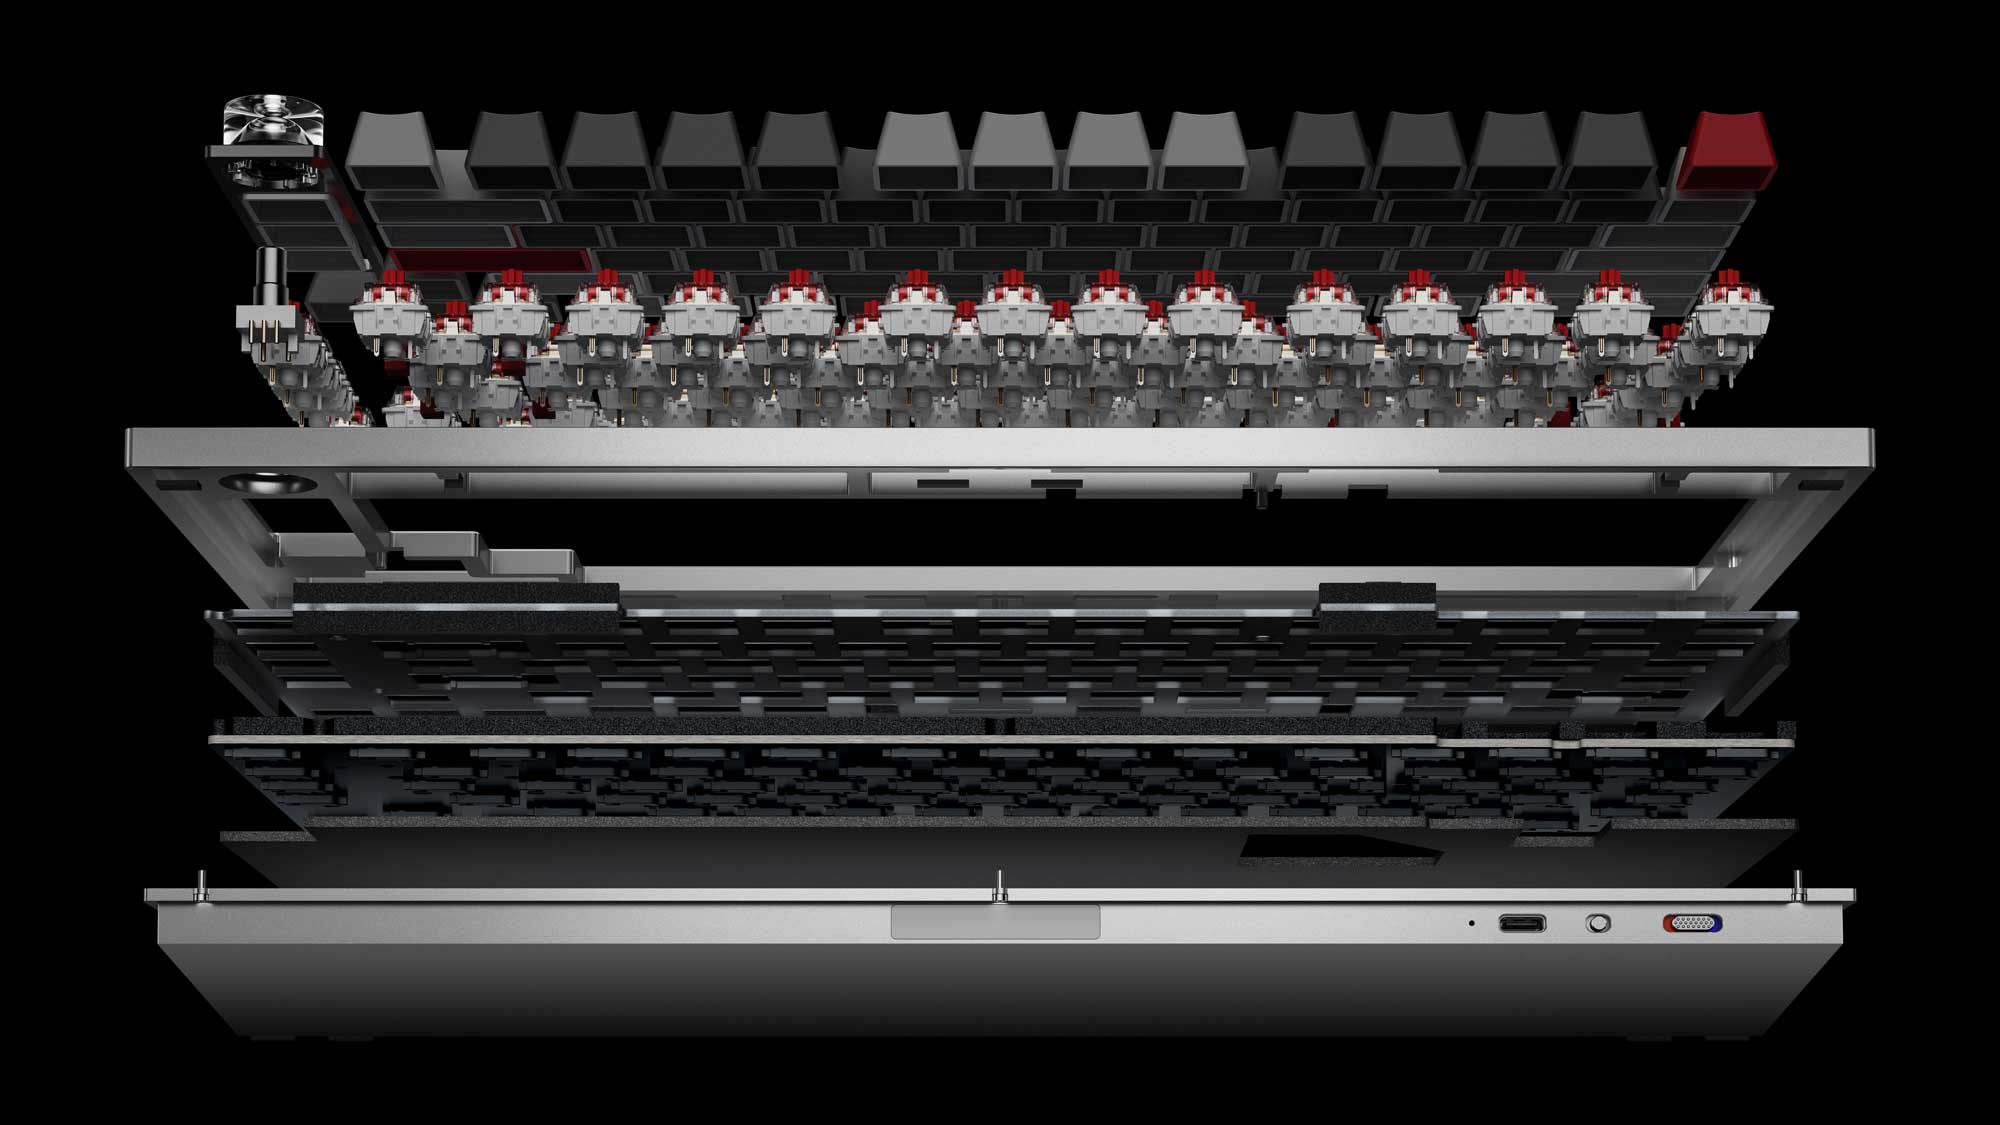 Keyboard 81 Pro Inner structure